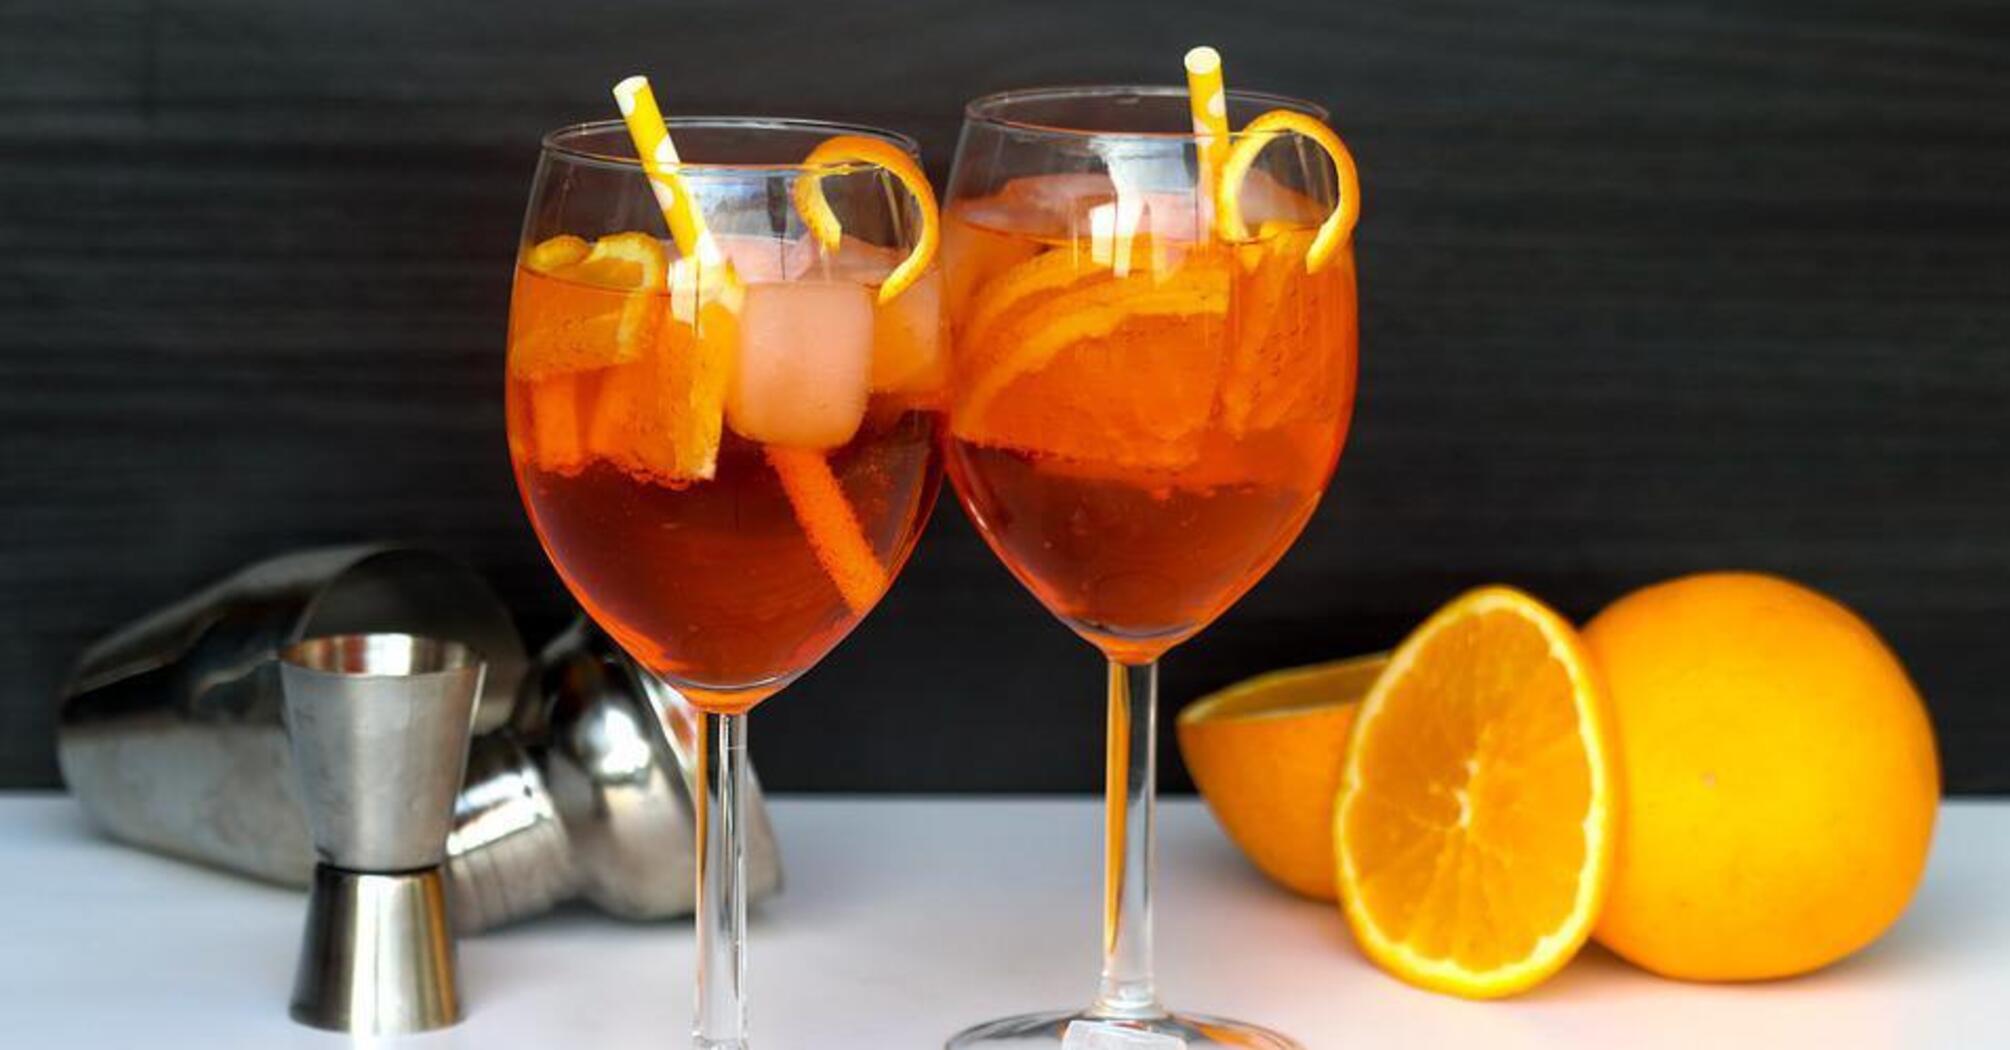 Aperol spritz at home: how to make a cult cocktail